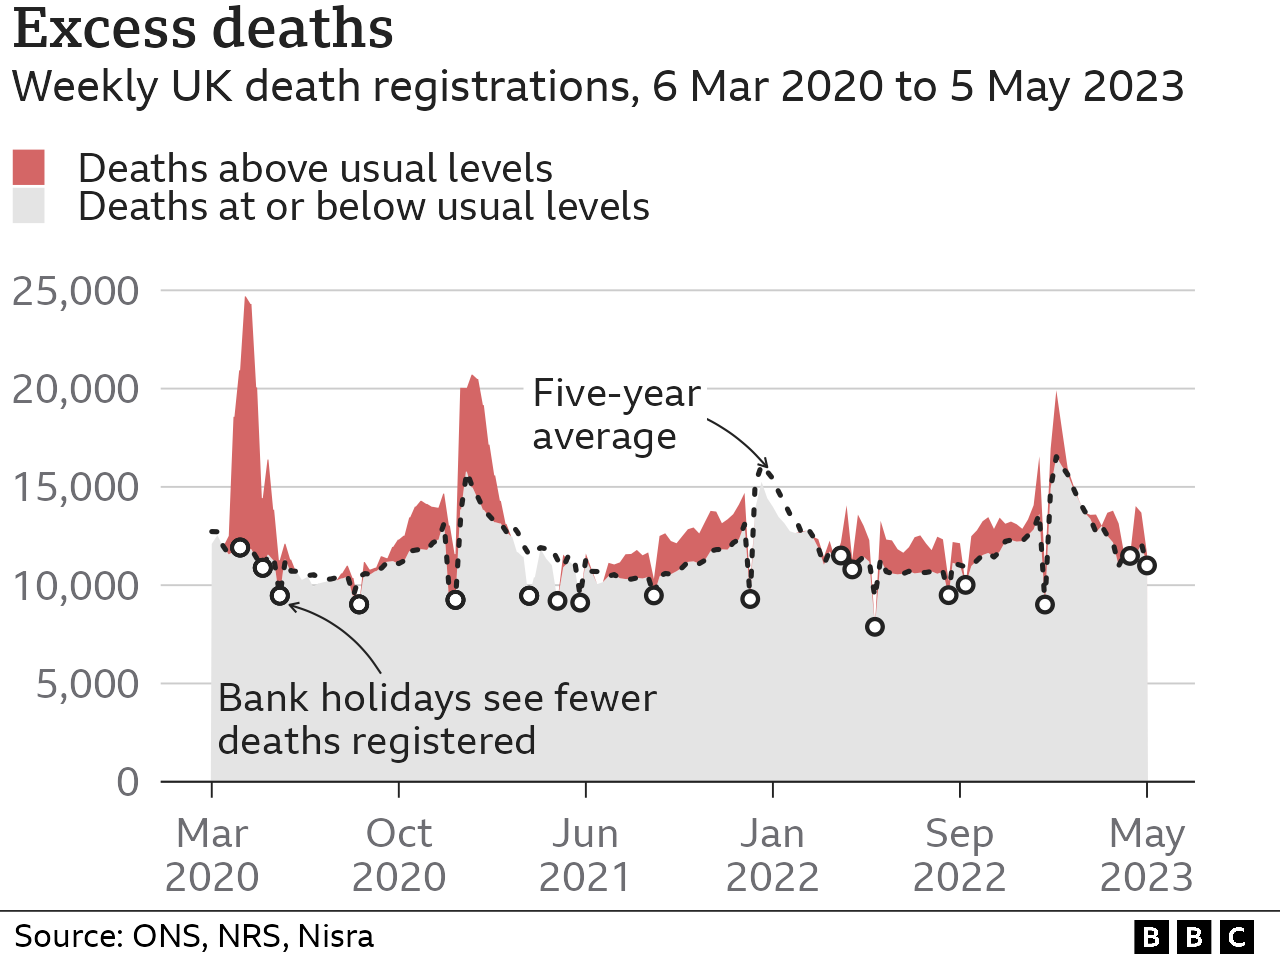 Chart showing a trend line of expected deaths, with excess deaths on top. There are two spikes in April 2020 and January 2021, reaching nearly 25,000 deaths in April 2020. The trend then drops to a steady level at about 15,000 deaths, with one last spike in mid-January 2023